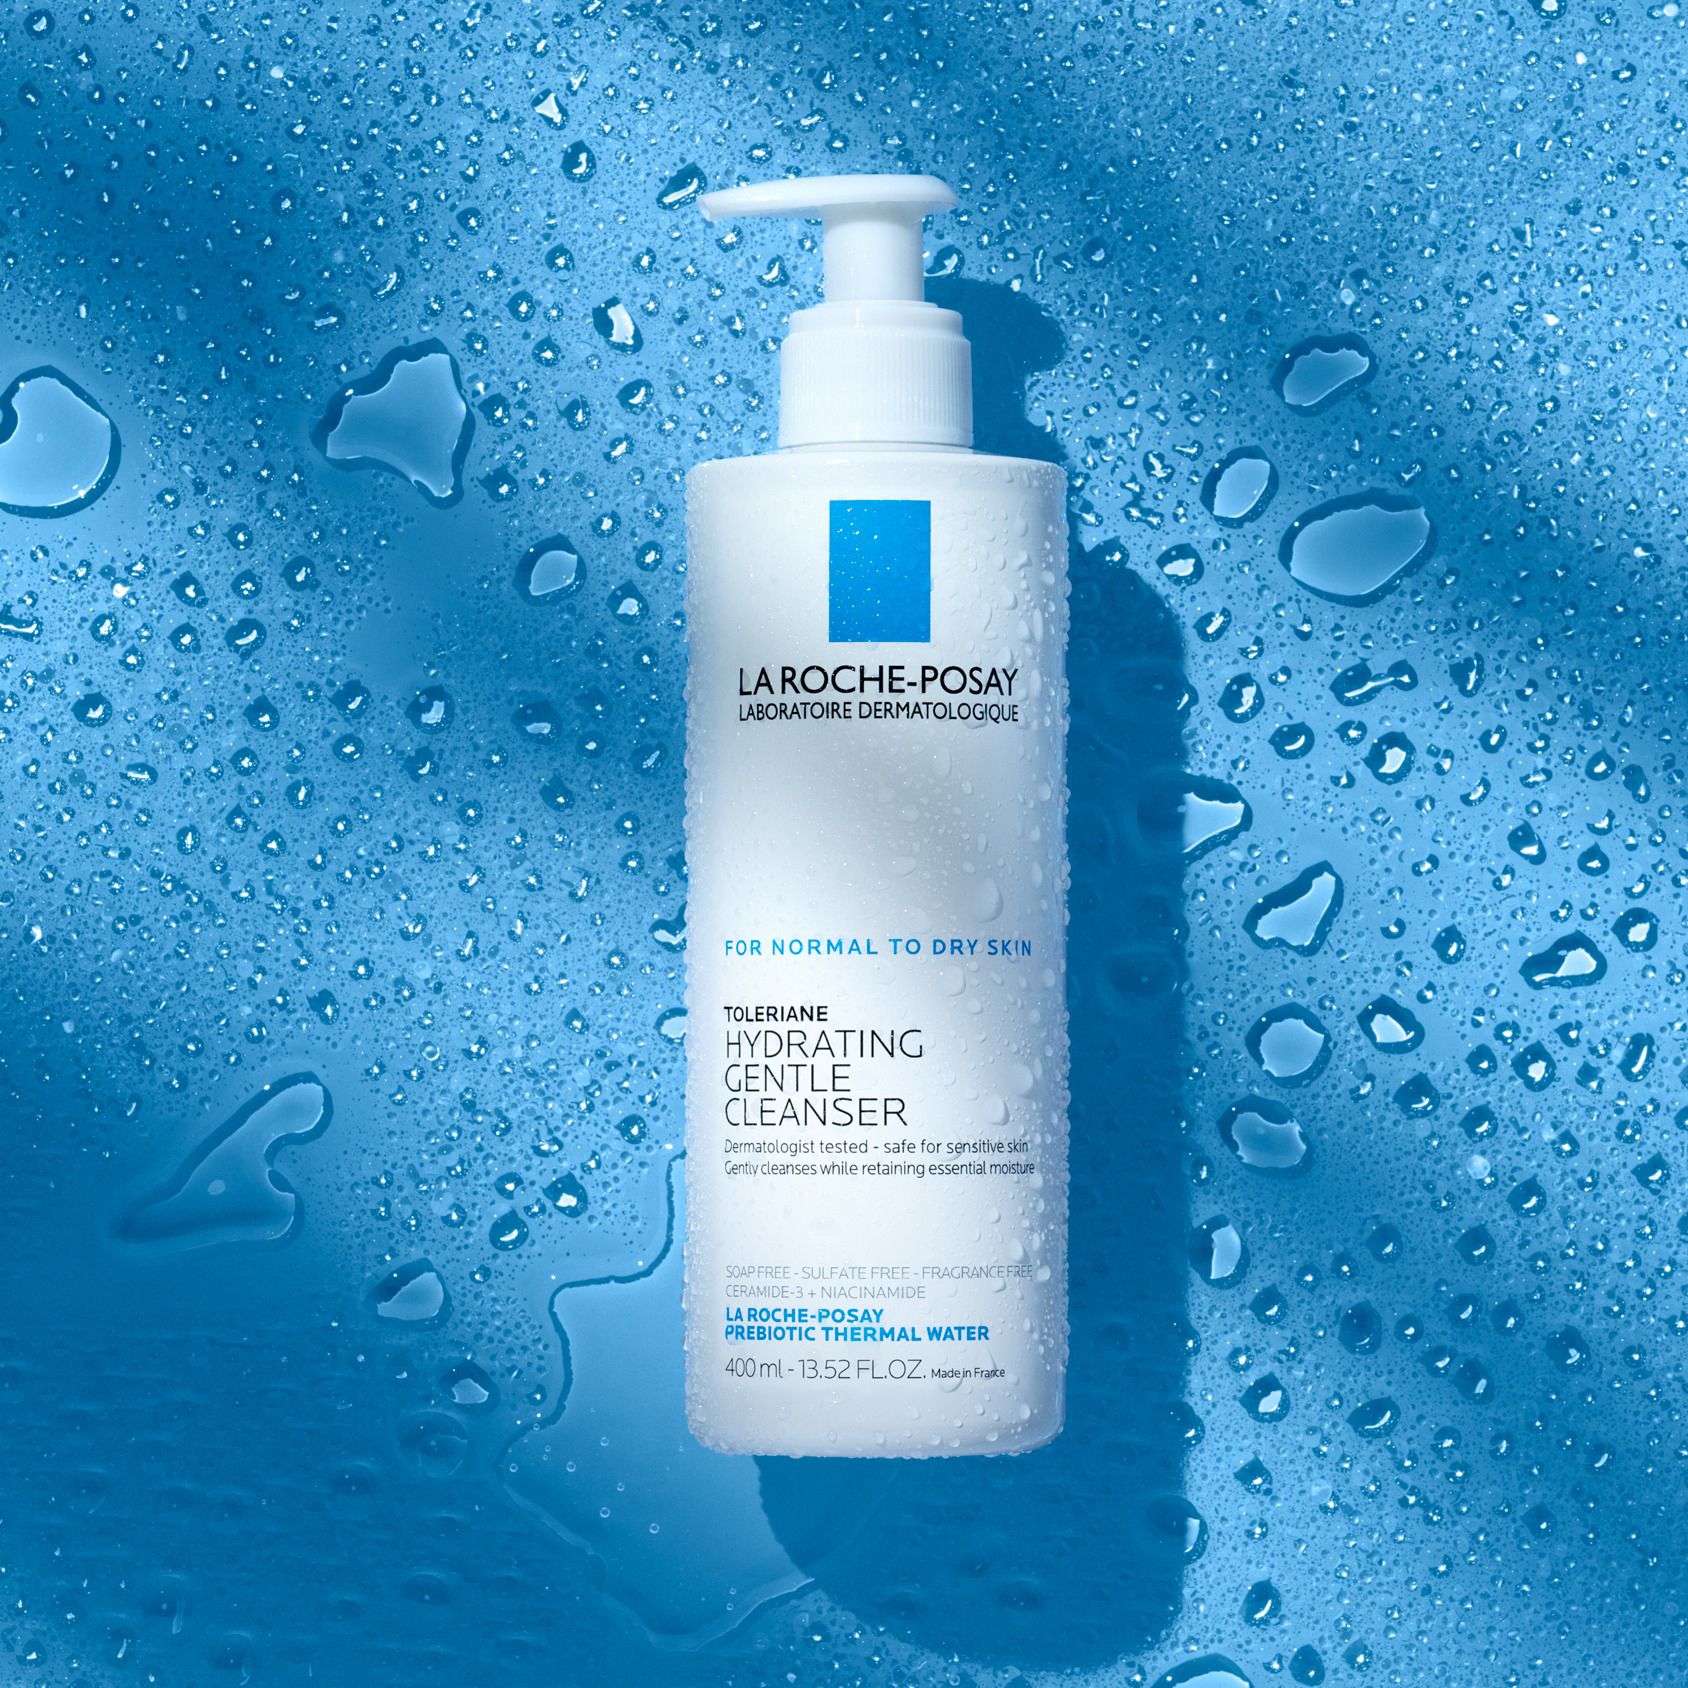 A mild but effective hydrating gel cleanser for normal to